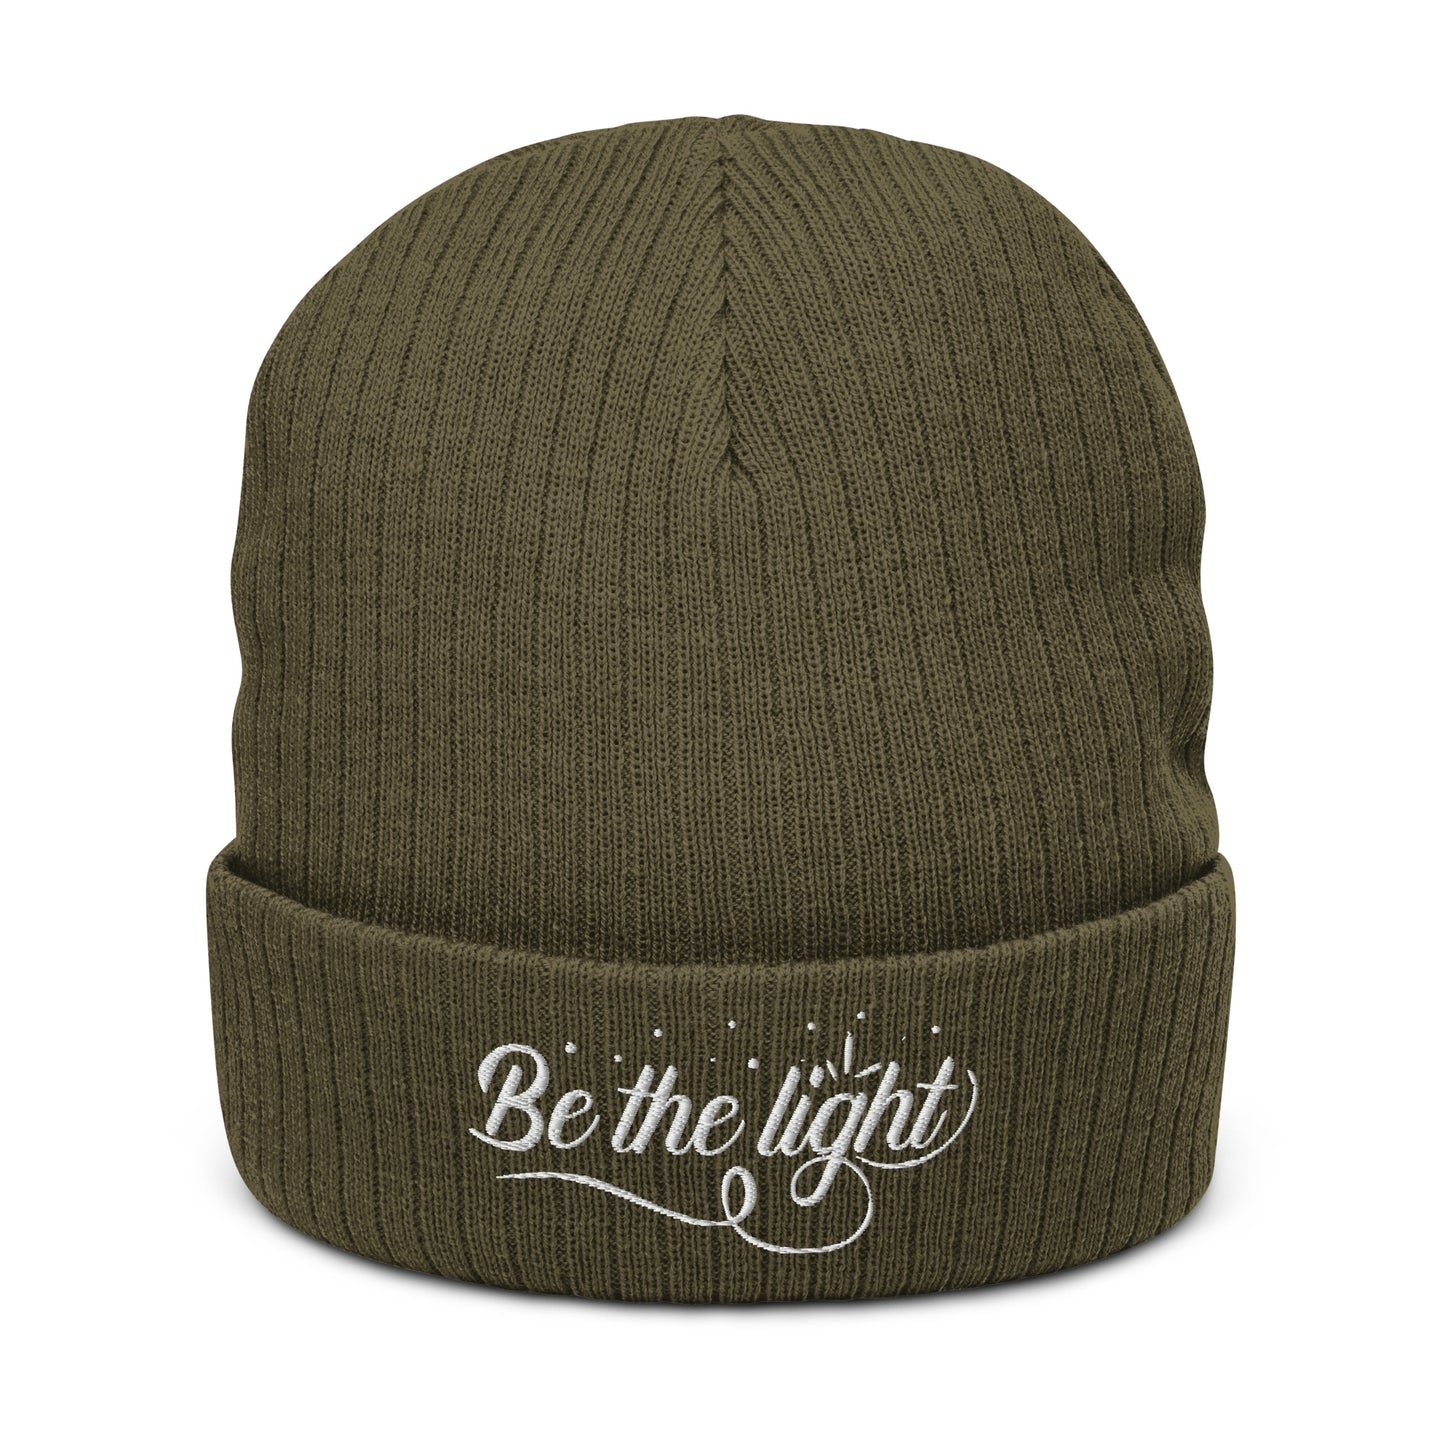 "Be The Light" Ribbed Knit Beanie